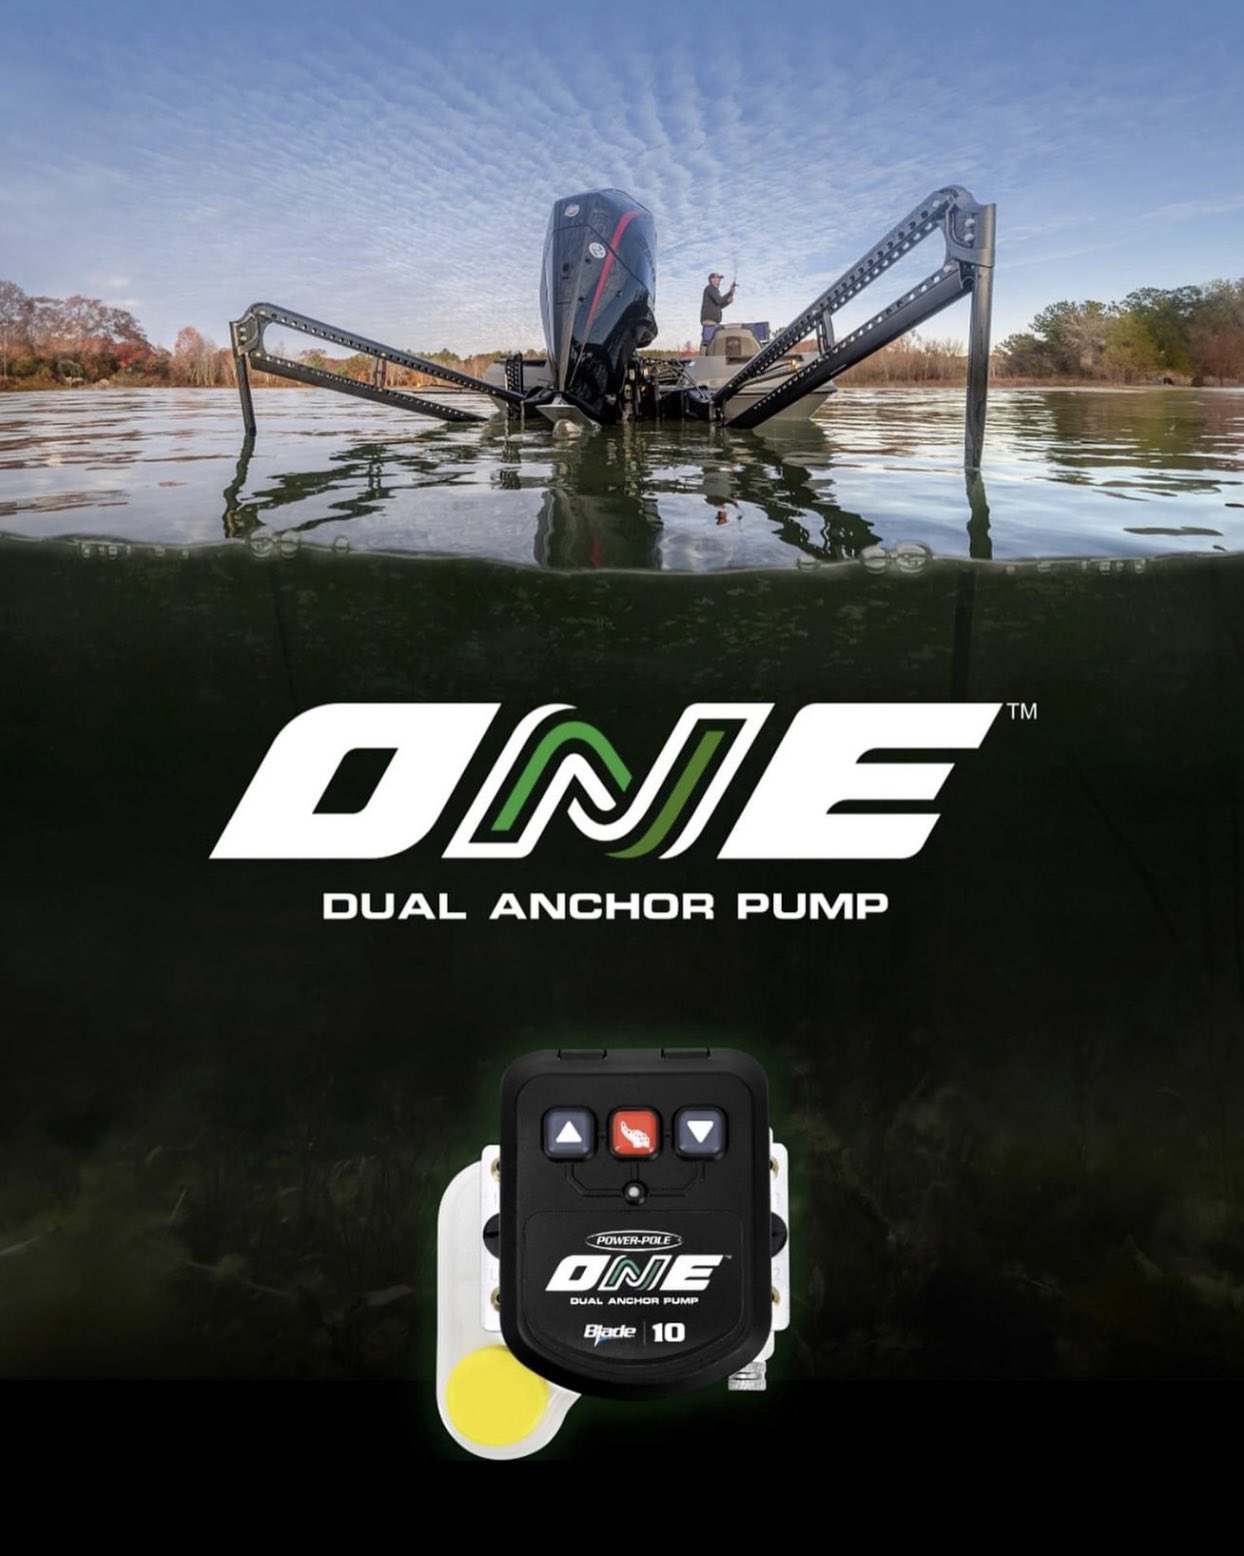 Power-Pole on X: Did you see what we announced at the Classic??? Power-Pole  ONE Pump, strong enough to power dual shallow water anchors smoother and  quieter than ever before. Our Dual Anchors